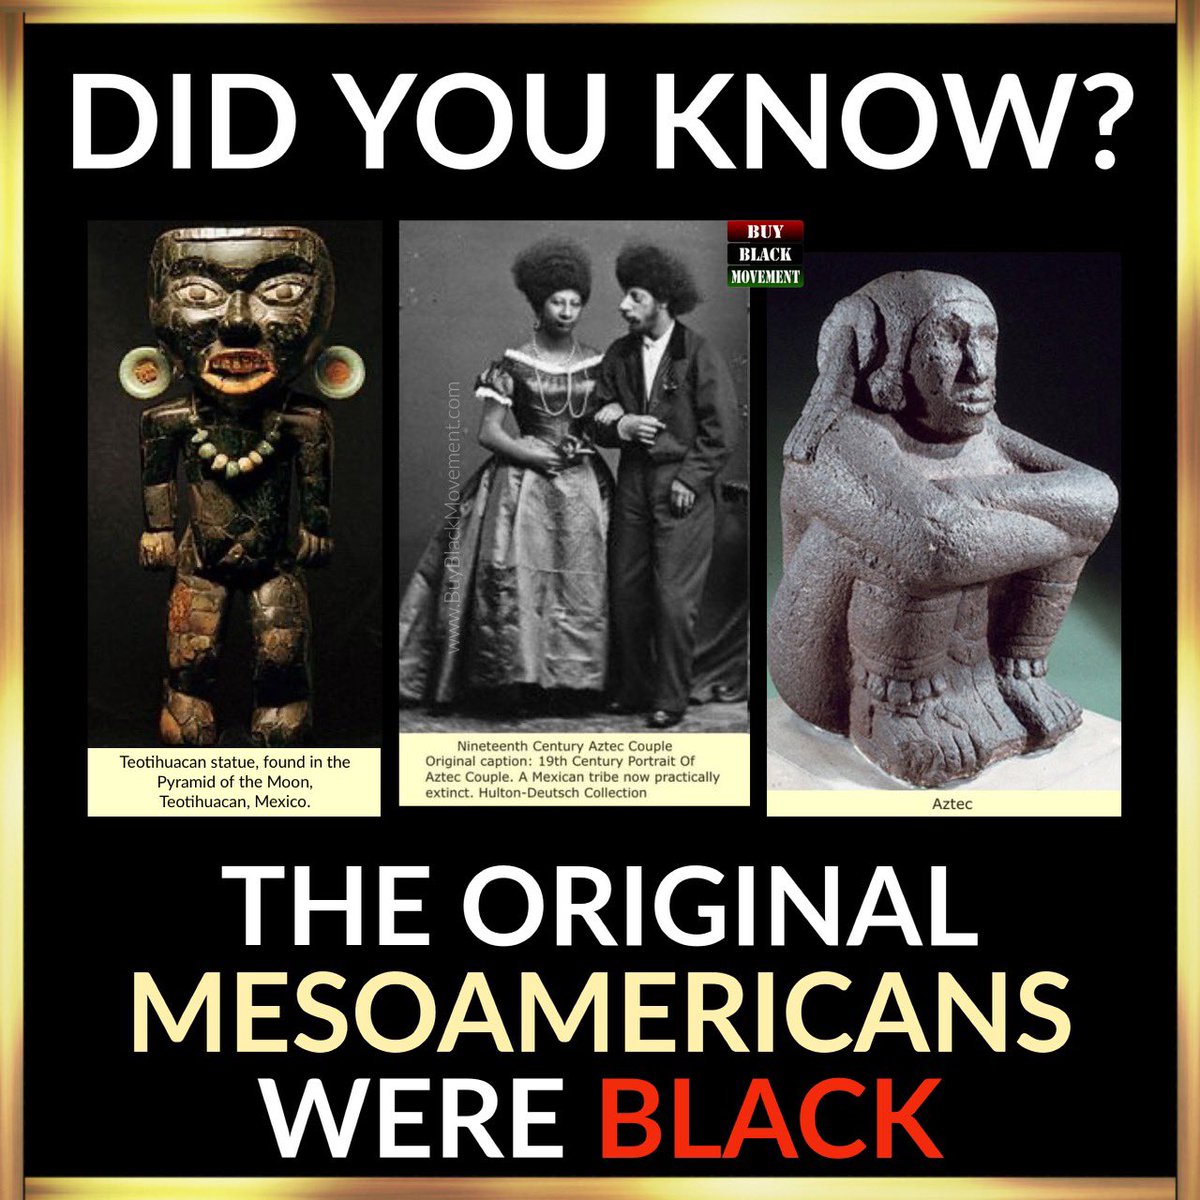 🌟Check out those Afros! It’s widely accepted that the Olmecs were the “Mother” of all Mesoamerican civilizations. Dr. Ivan Van Sertima did amazing work showing that the Olmecs were undeniably African…(full post here: tinyurl.com/4fam43c3) ❤️🖤💚BuyBlackMovement.com